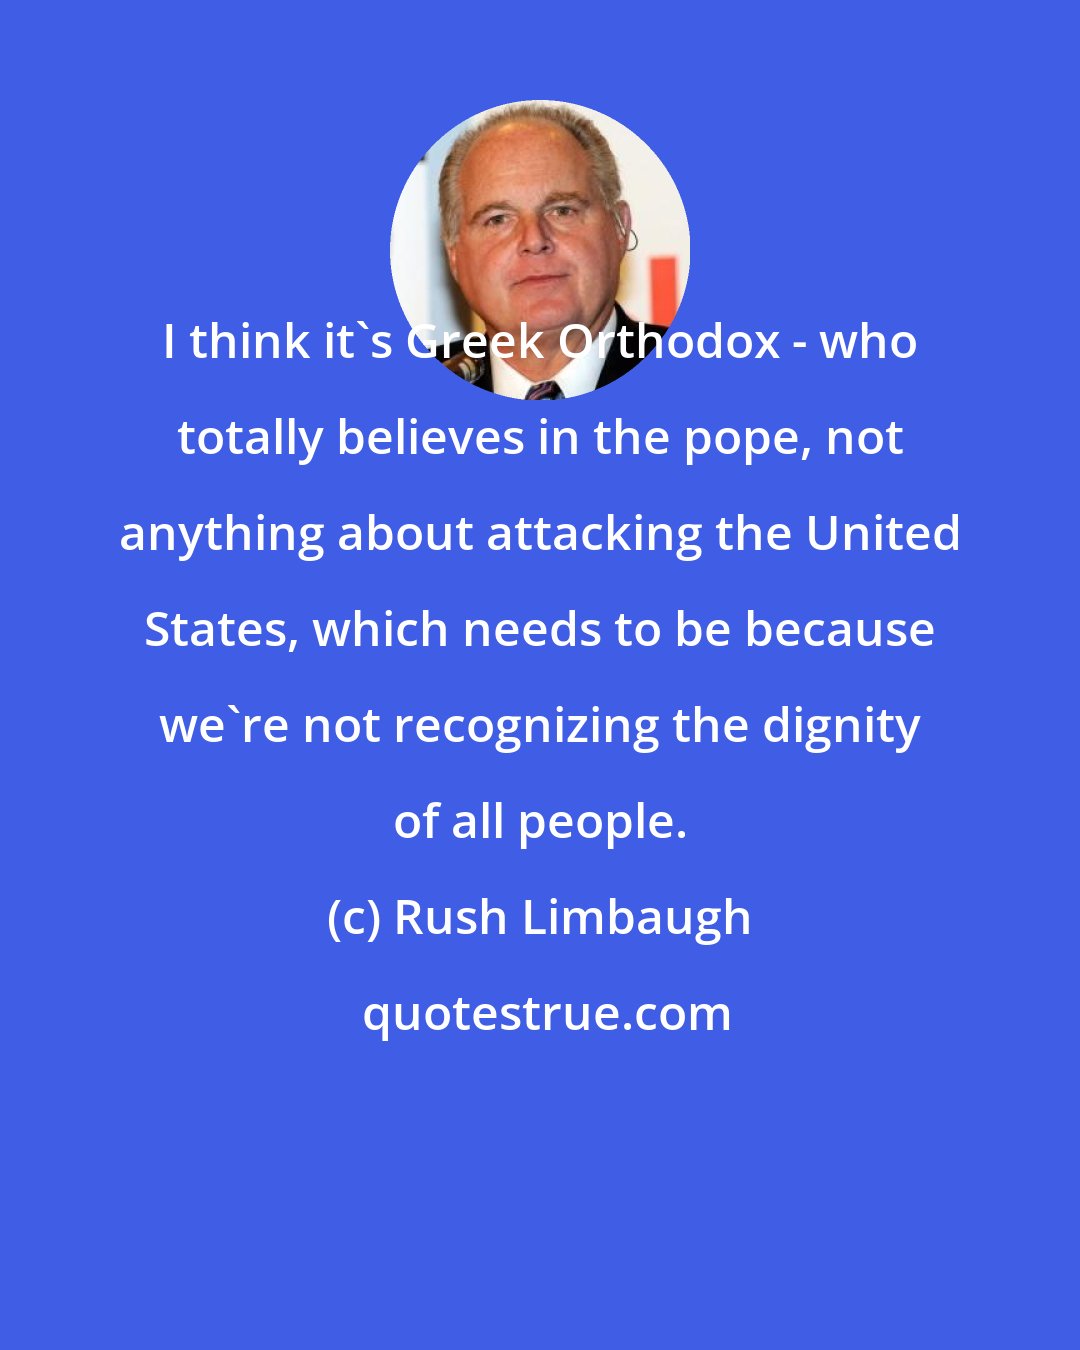 Rush Limbaugh: I think it's Greek Orthodox - who totally believes in the pope, not anything about attacking the United States, which needs to be because we're not recognizing the dignity of all people.